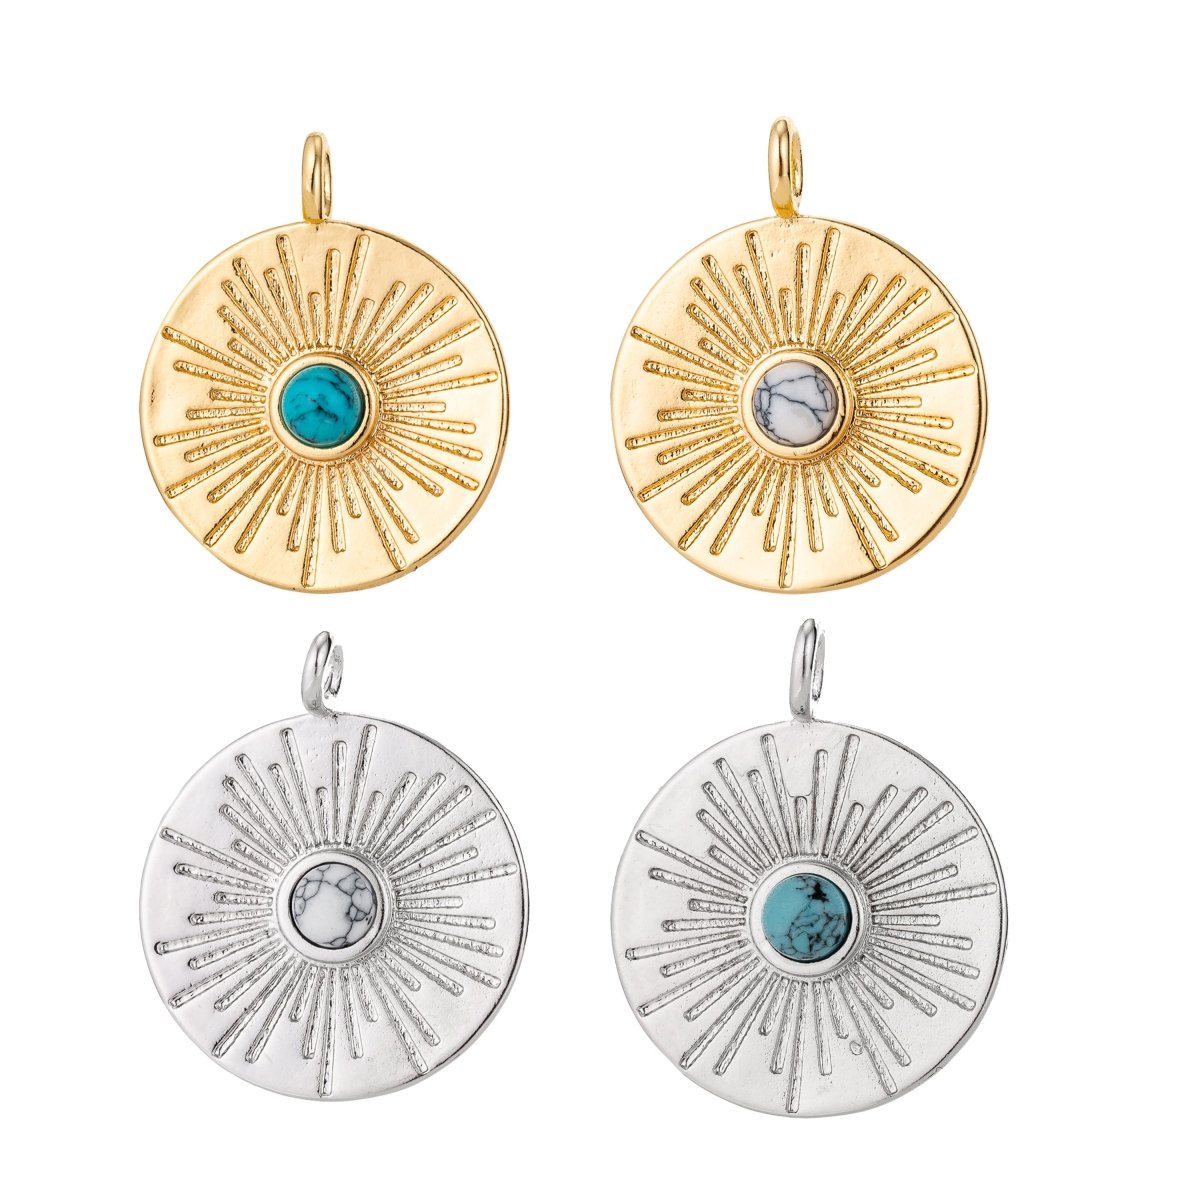 Dainty 18K Gold Filled / White Gold Sun Sunburst Coin Charm Turquoise / White Howlite Charm for Earring Necklace Jewelry Making Supplies C-271 C-272 C-303 D-778 - DLUXCA